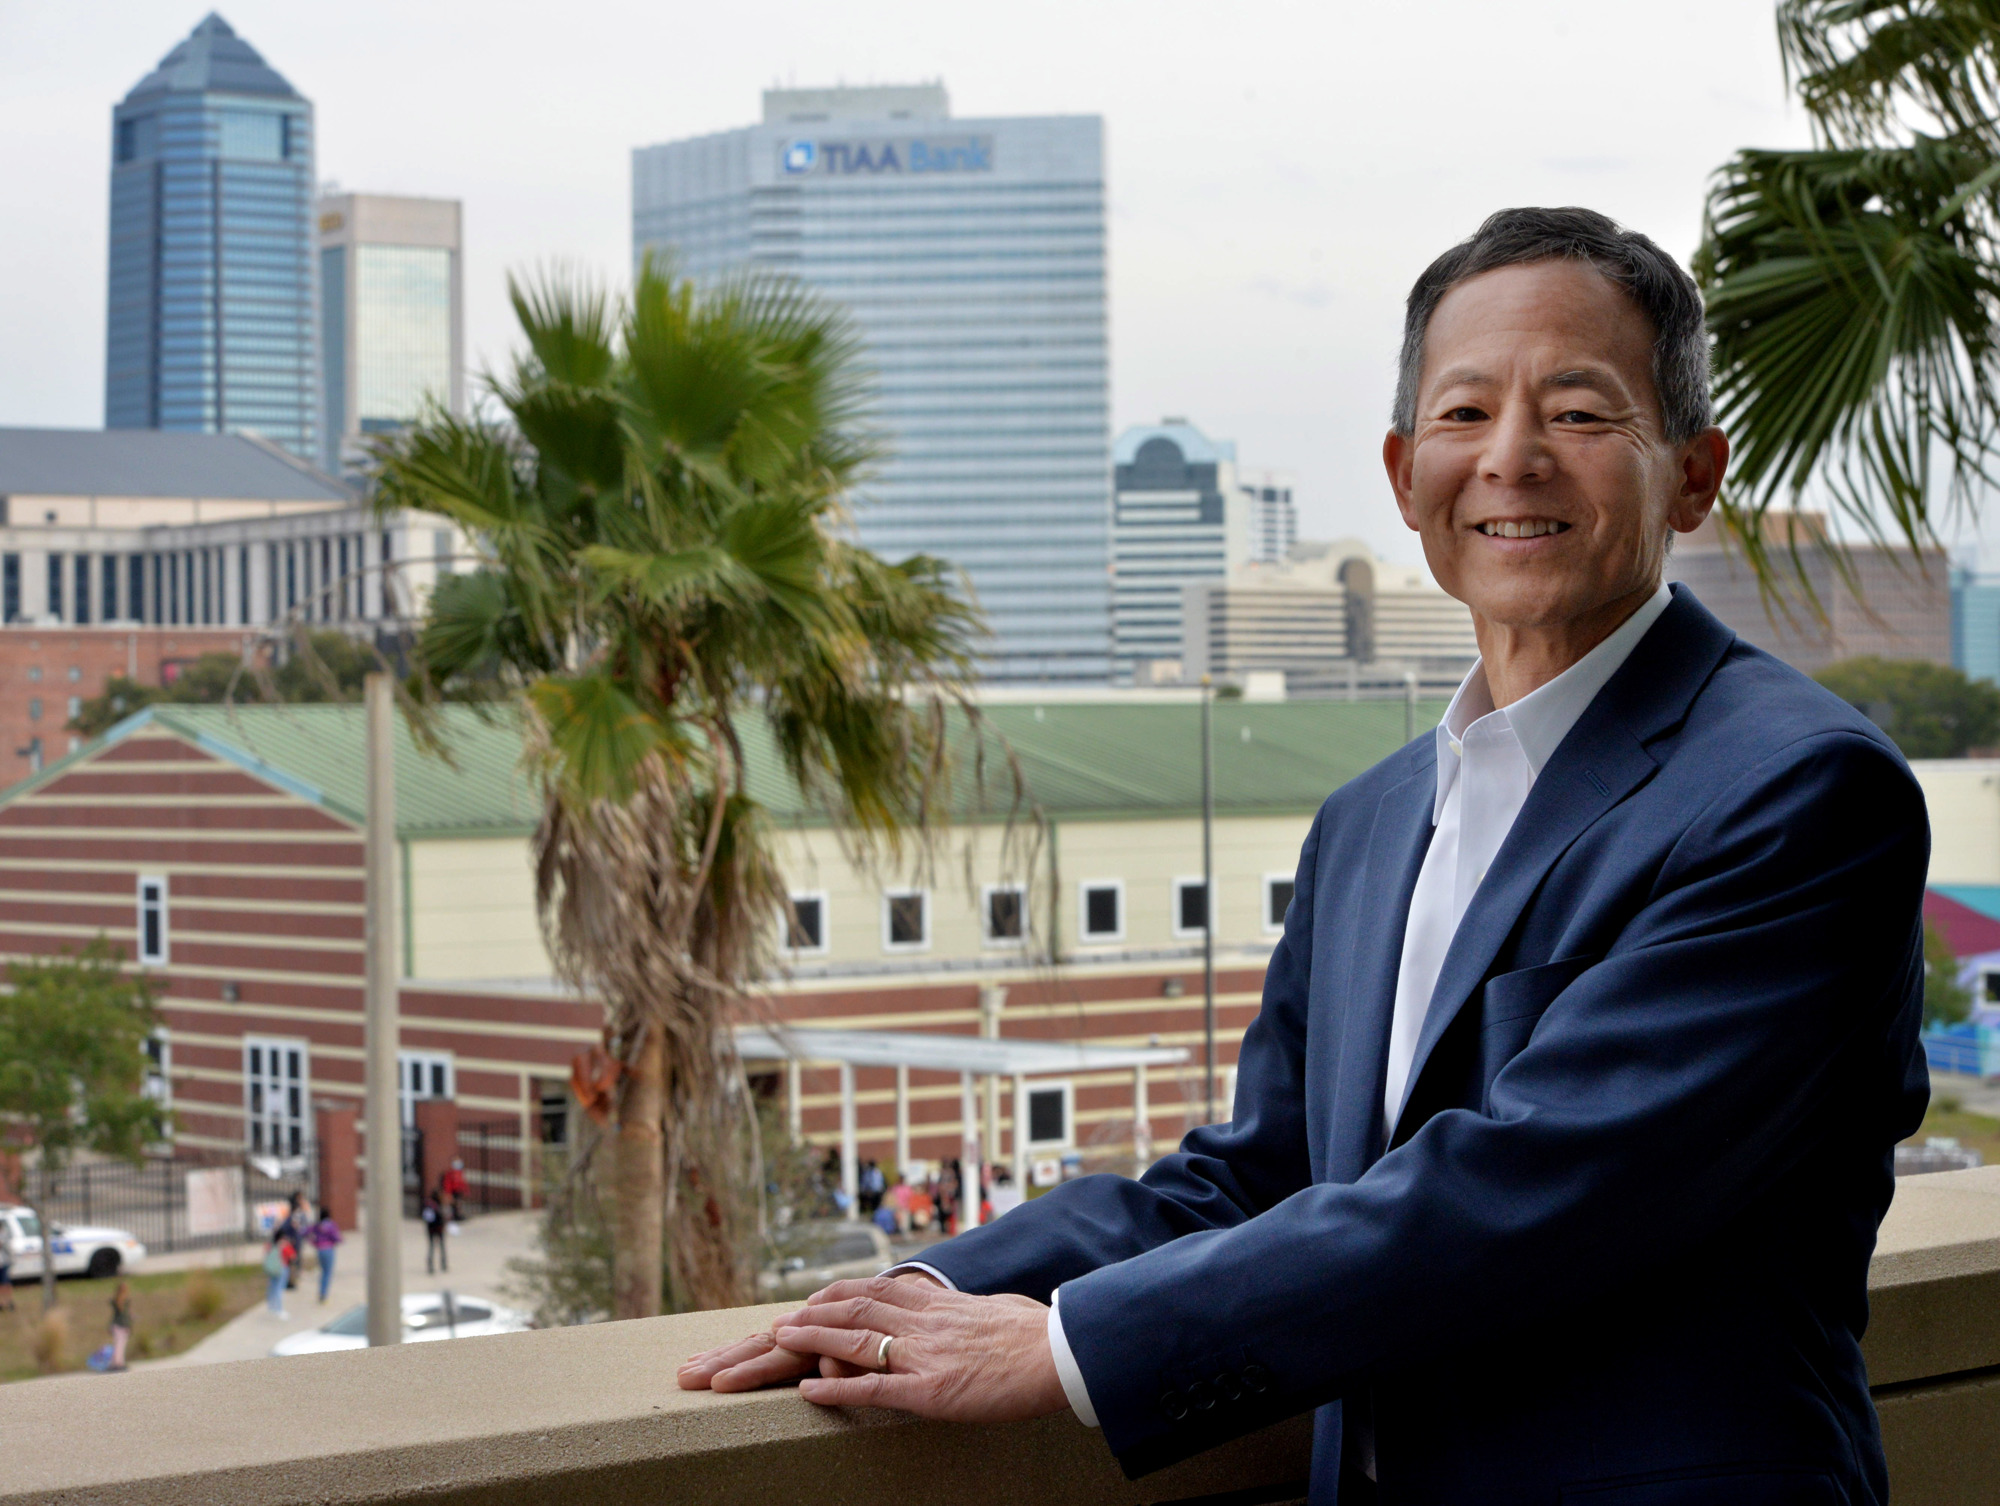 Community First Credit Union of Florida President and CEO John Hirabayashi. (Photo by Dede Smith)